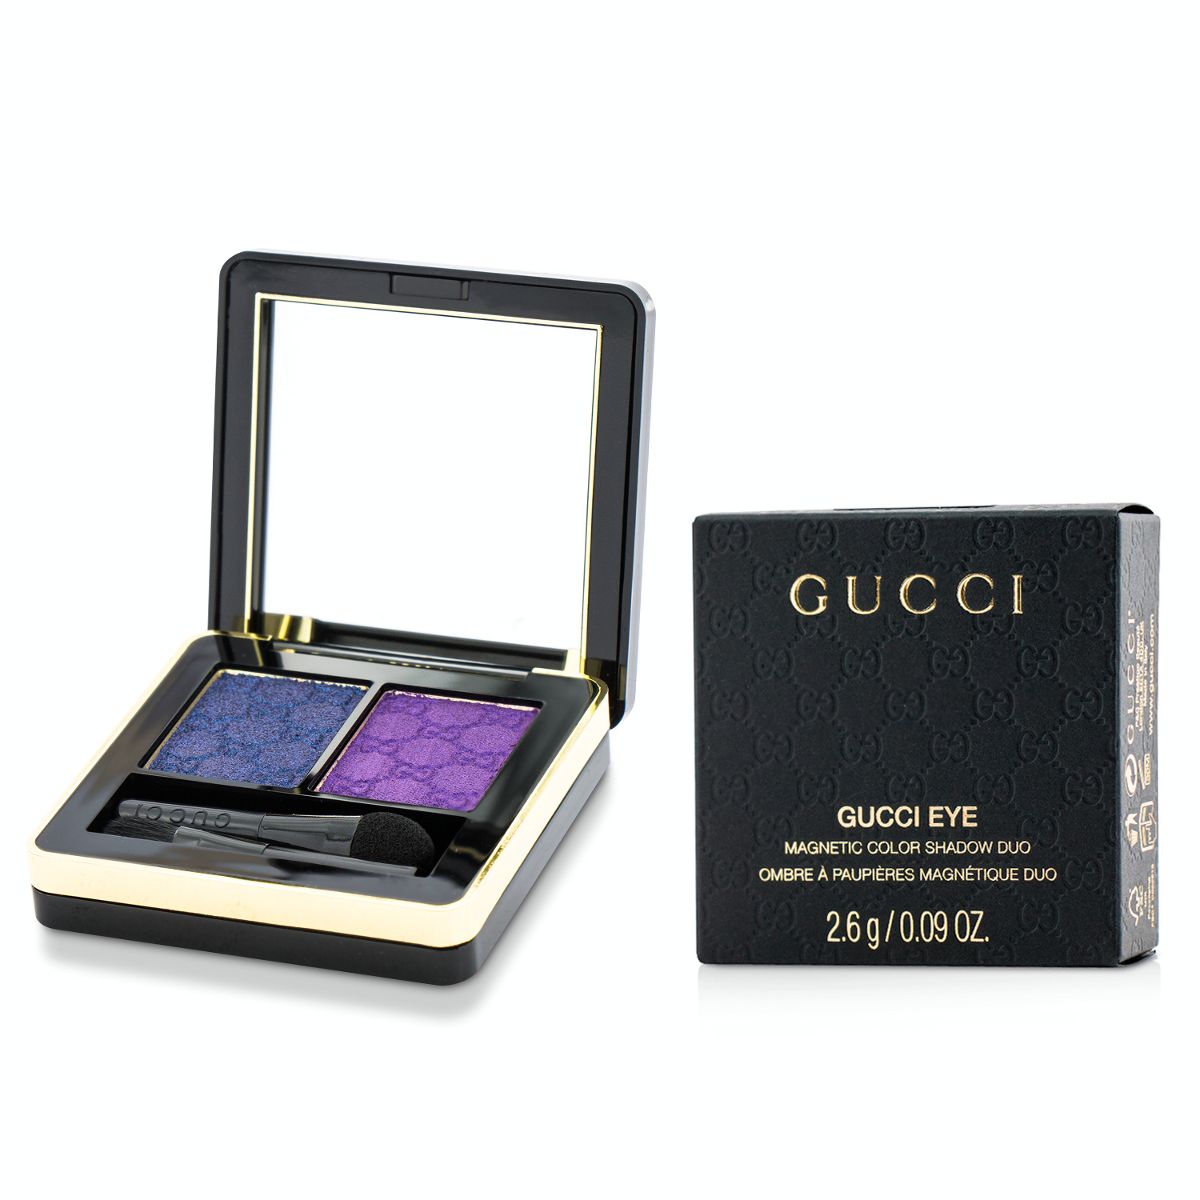 Magnetic Color Shadow Duo - #070 Peacock Gucci Image